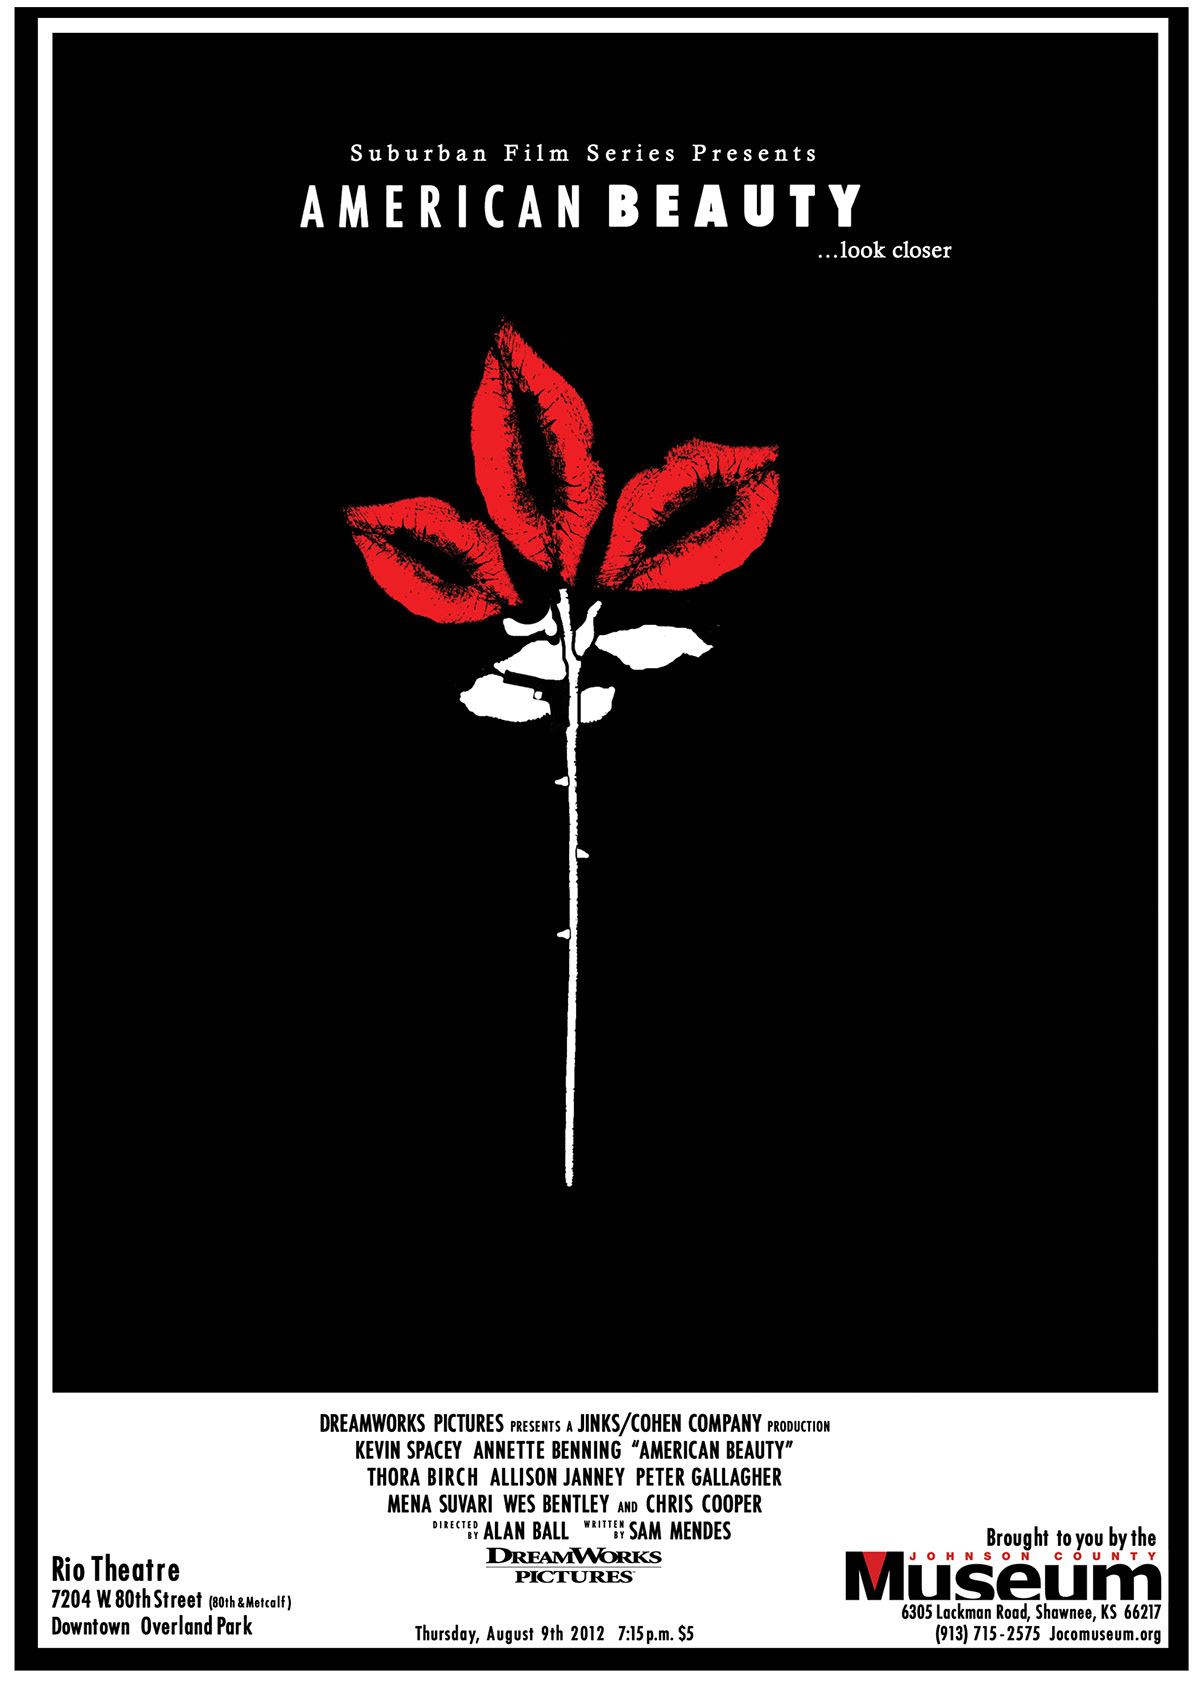 #movieposters #movies #print #americanbeauty #fasttimes